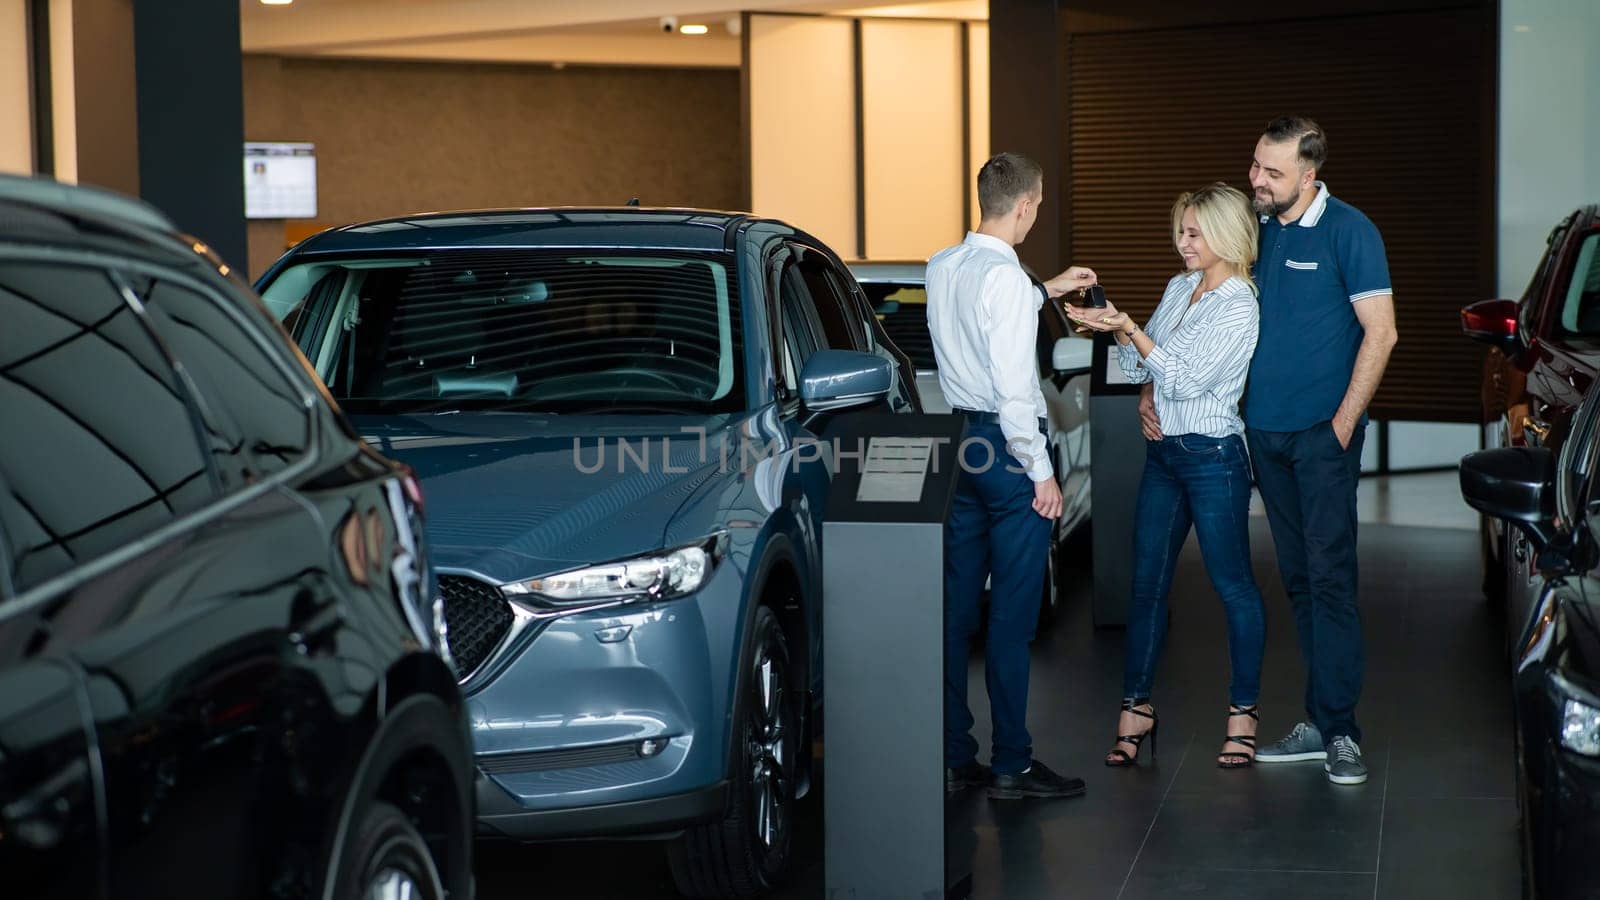 The seller hands over the car keys to the buyers. The couple bought a new car